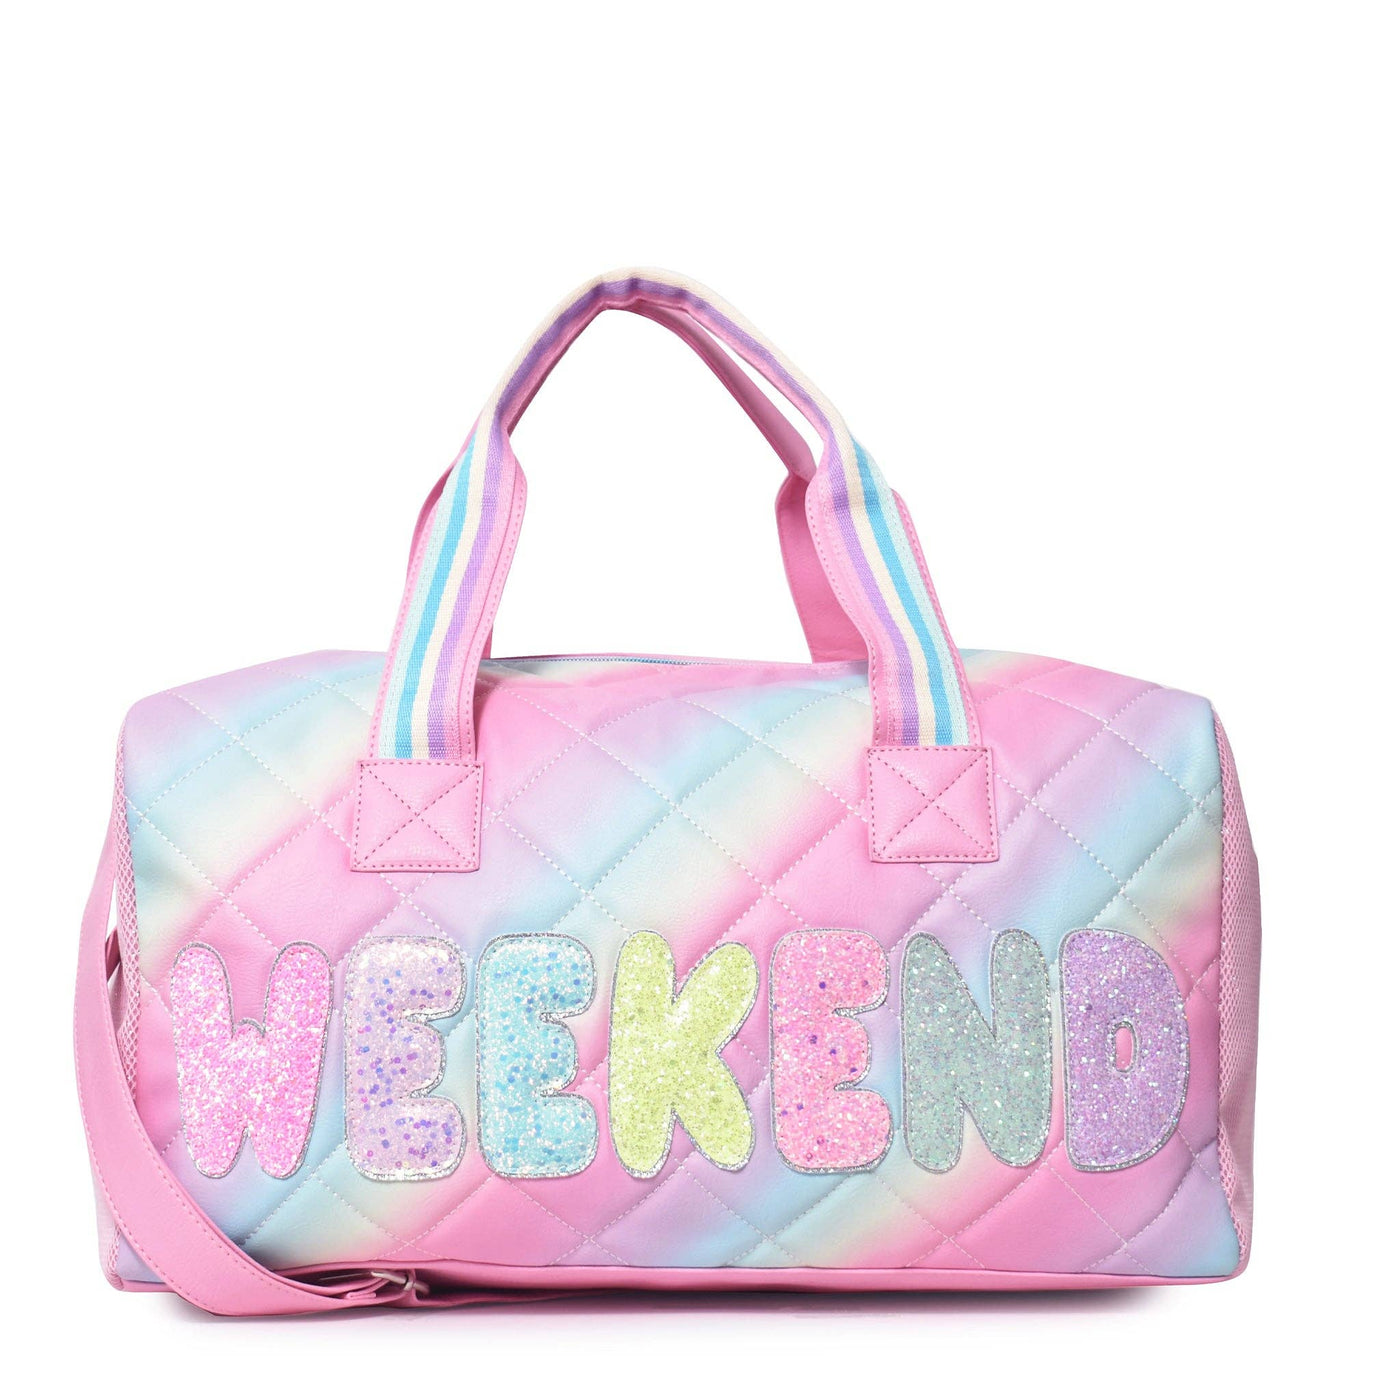 Miss Gwen's OMG Accessories - 'Weekend' Quilted Ombre Large Duffle Bag